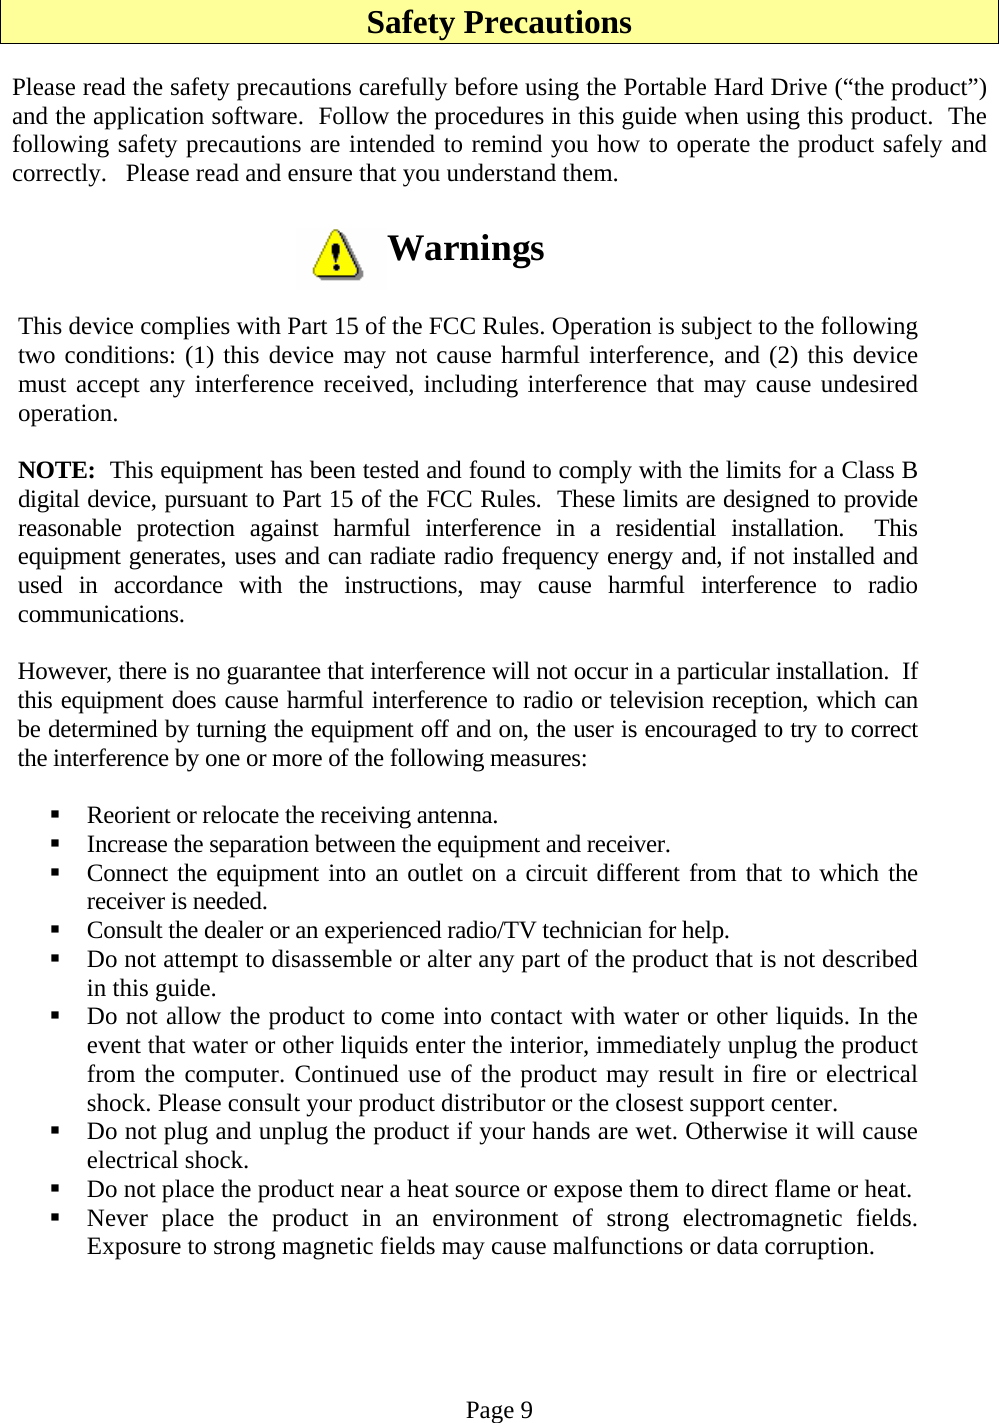 Safety Precautions  Please read the safety precautions carefully before using the Portable Hard Drive (“the product”) and the application software.  Follow the procedures in this guide when using this product.  The following safety precautions are intended to remind you how to operate the product safely and correctly.   Please read and ensure that you understand them.  Warnings  This device complies with Part 15 of the FCC Rules. Operation is subject to the following two conditions: (1) this device may not cause harmful interference, and (2) this device must accept any interference received, including interference that may cause undesired operation.  NOTE:  This equipment has been tested and found to comply with the limits for a Class B digital device, pursuant to Part 15 of the FCC Rules.  These limits are designed to provide reasonable protection against harmful interference in a residential installation.  This equipment generates, uses and can radiate radio frequency energy and, if not installed and used in accordance with the instructions, may cause harmful interference to radio communications.  However, there is no guarantee that interference will not occur in a particular installation.  If this equipment does cause harmful interference to radio or television reception, which can be determined by turning the equipment off and on, the user is encouraged to try to correct the interference by one or more of the following measures:   Reorient or relocate the receiving antenna.  Increase the separation between the equipment and receiver.  Connect the equipment into an outlet on a circuit different from that to which the receiver is needed.  Consult the dealer or an experienced radio/TV technician for help.  Do not attempt to disassemble or alter any part of the product that is not described in this guide.  Do not allow the product to come into contact with water or other liquids. In the event that water or other liquids enter the interior, immediately unplug the product from the computer. Continued use of the product may result in fire or electrical shock. Please consult your product distributor or the closest support center.  Do not plug and unplug the product if your hands are wet. Otherwise it will cause electrical shock.  Do not place the product near a heat source or expose them to direct flame or heat.  Never place the product in an environment of strong electromagnetic fields. Exposure to strong magnetic fields may cause malfunctions or data corruption.   Page 9 